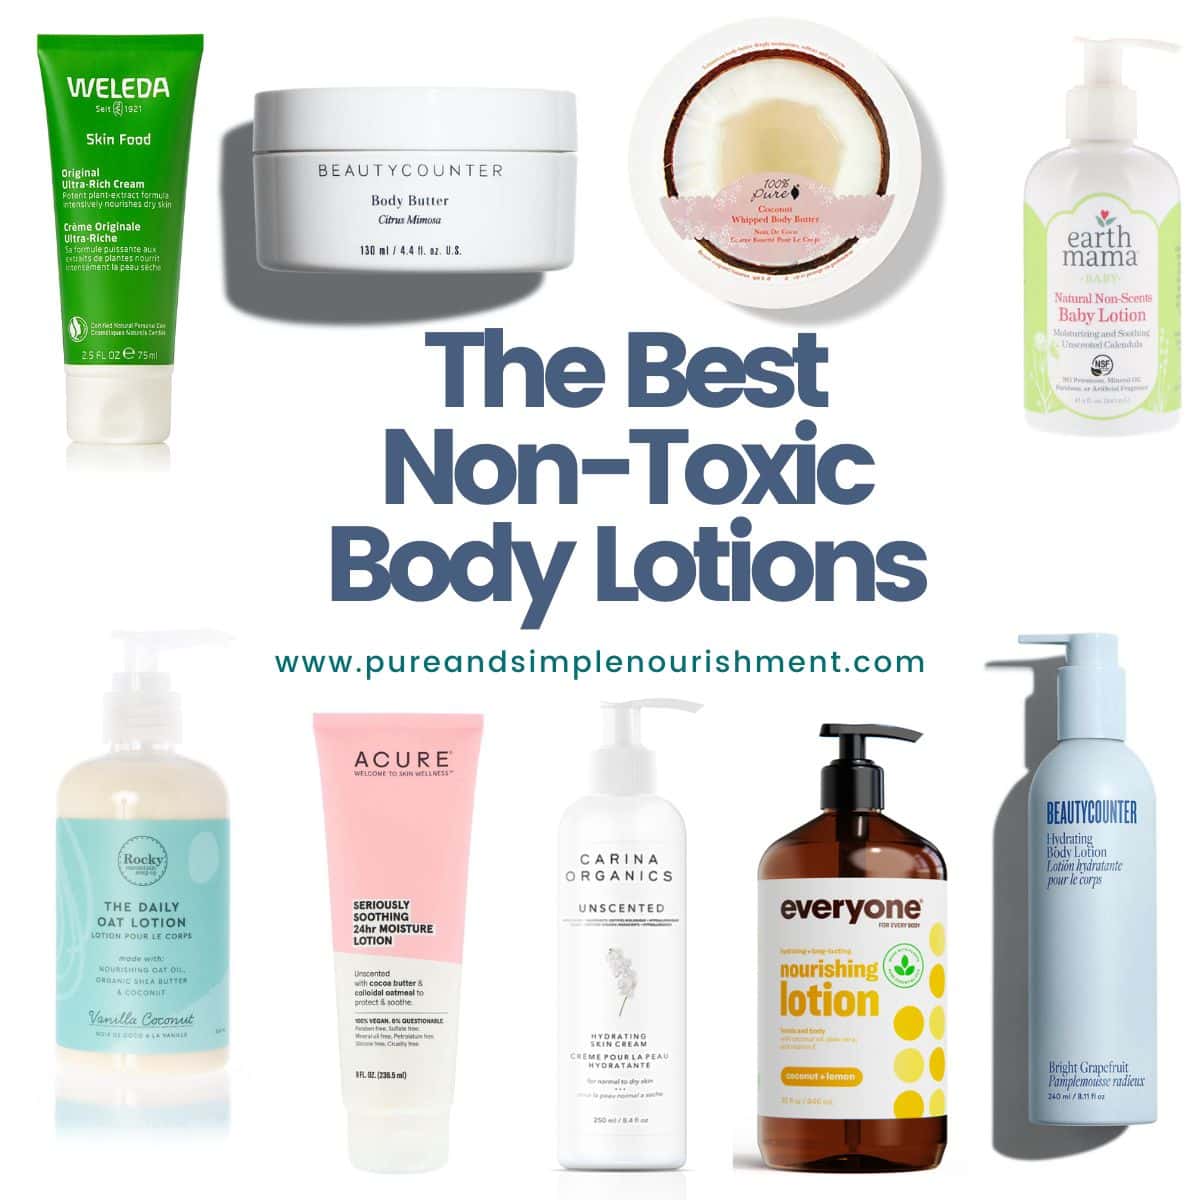 A collage of different body lotions with the title "The Best Non-Toxic Body Lotions" over them.